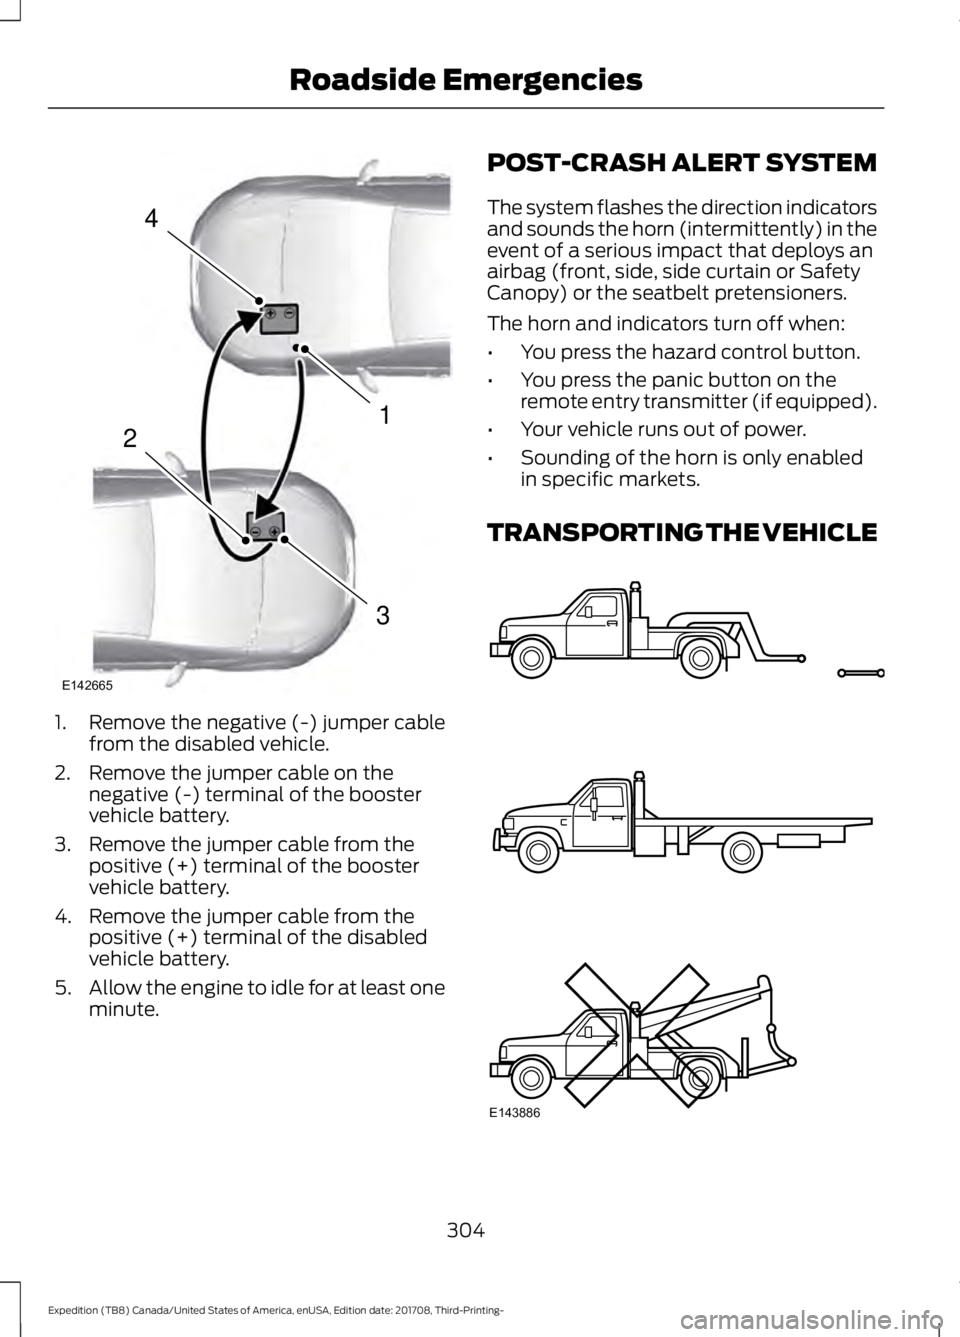 FORD EXPEDITION 2018  Owners Manual 1. Remove the negative (-) jumper cable
from the disabled vehicle.
2. Remove the jumper cable on the negative (-) terminal of the booster
vehicle battery.
3. Remove the jumper cable from the positive 